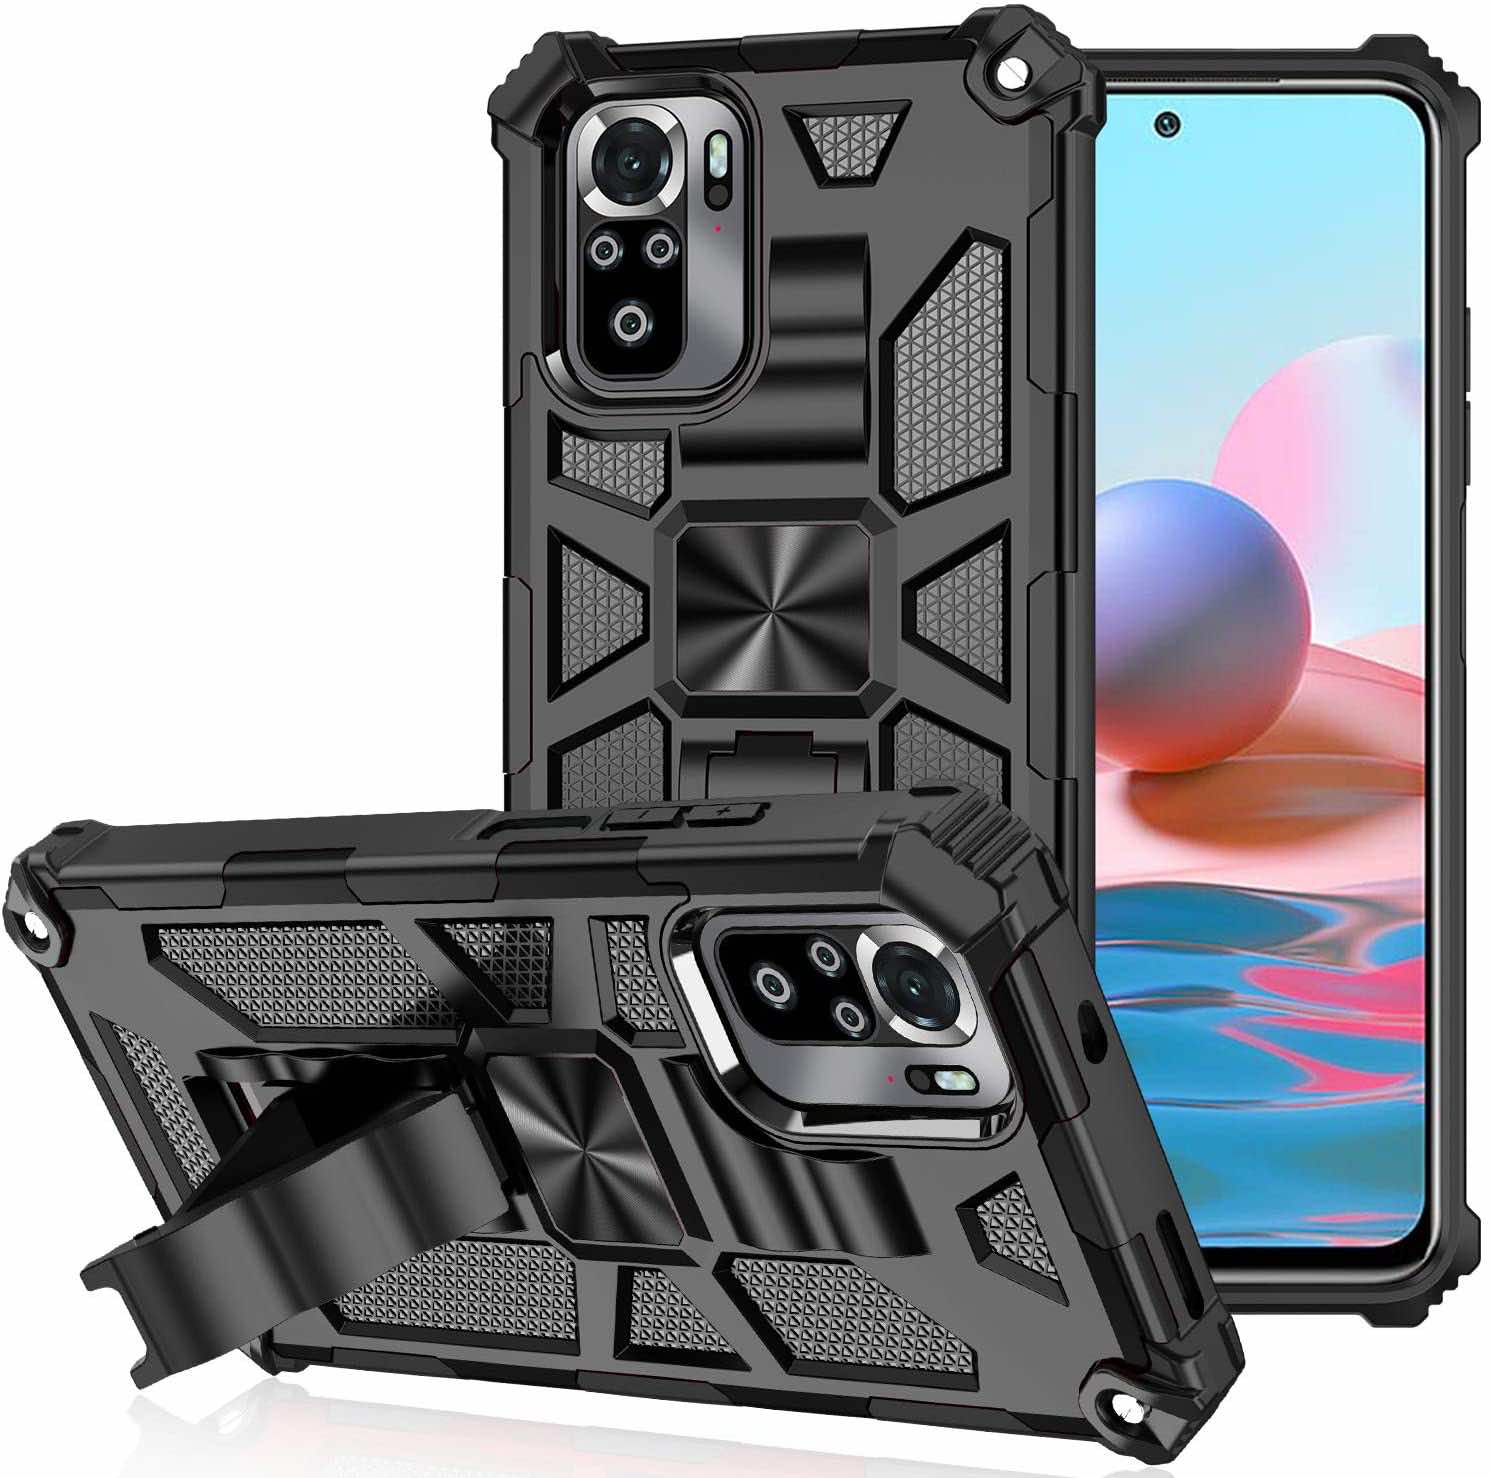 Black Designed for Redmi Note 10S Case with Kickstand with Card Pocket Military Grade Drop Protection Back Cover, GGXXGG Case for Xiaomi Redmi Note 10 4G/Note 10S Armor Shockproof Bumper, 